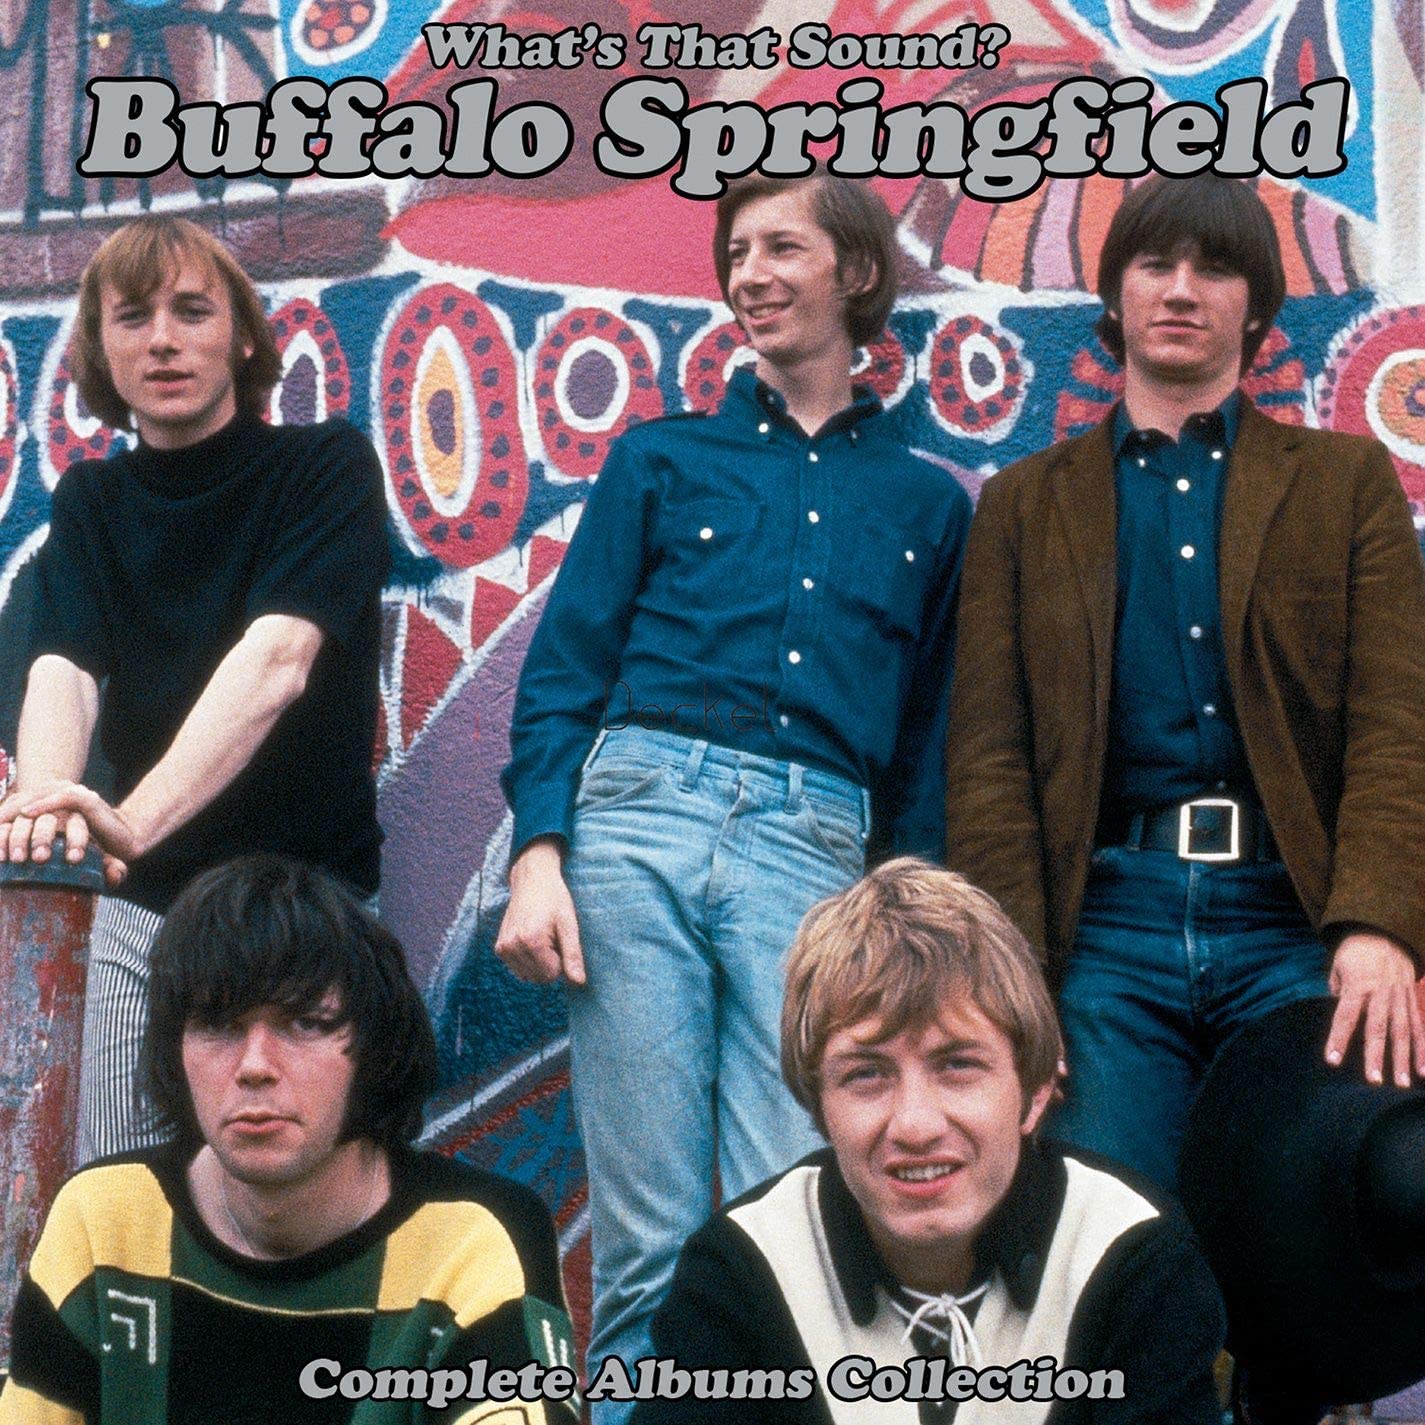 Buffalo Springfield - What's That Sound - 5CD